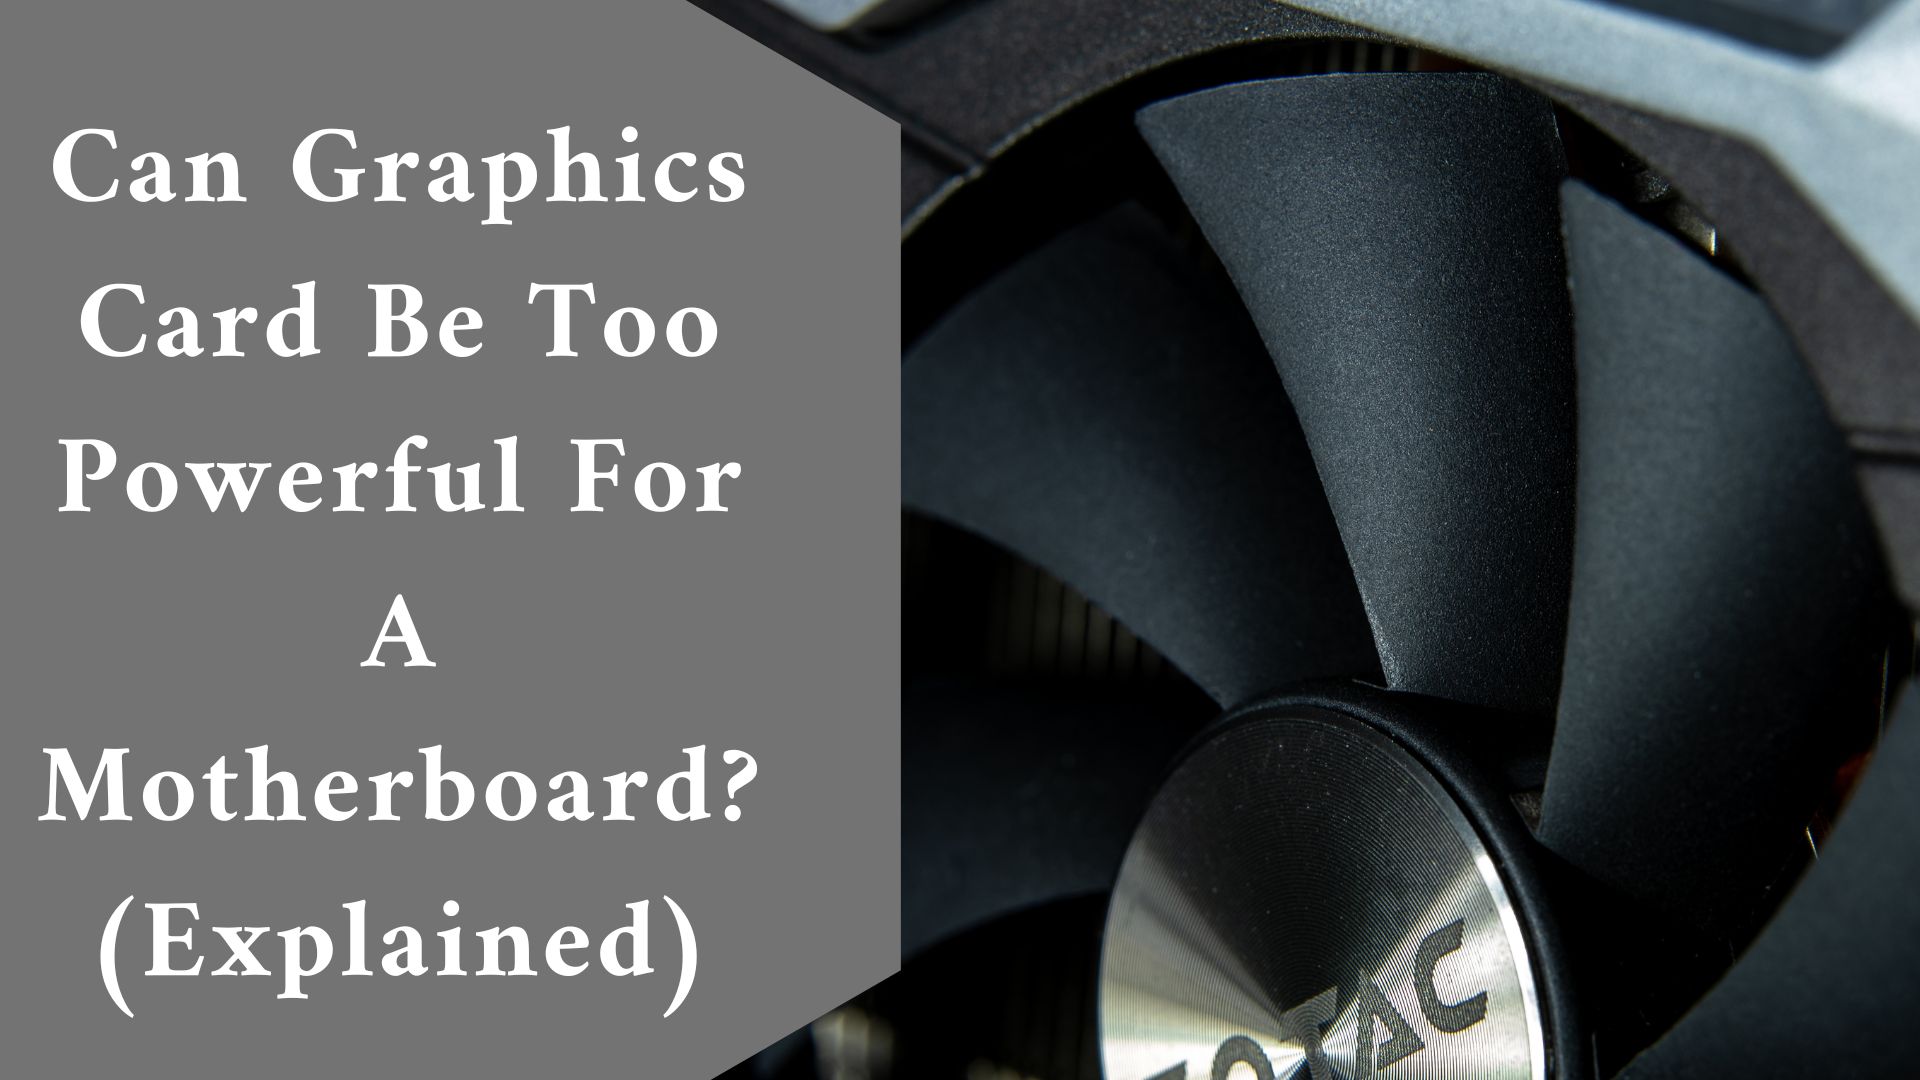 Can Graphics Card Be Too Powerful For A Motherboard? (Explained)